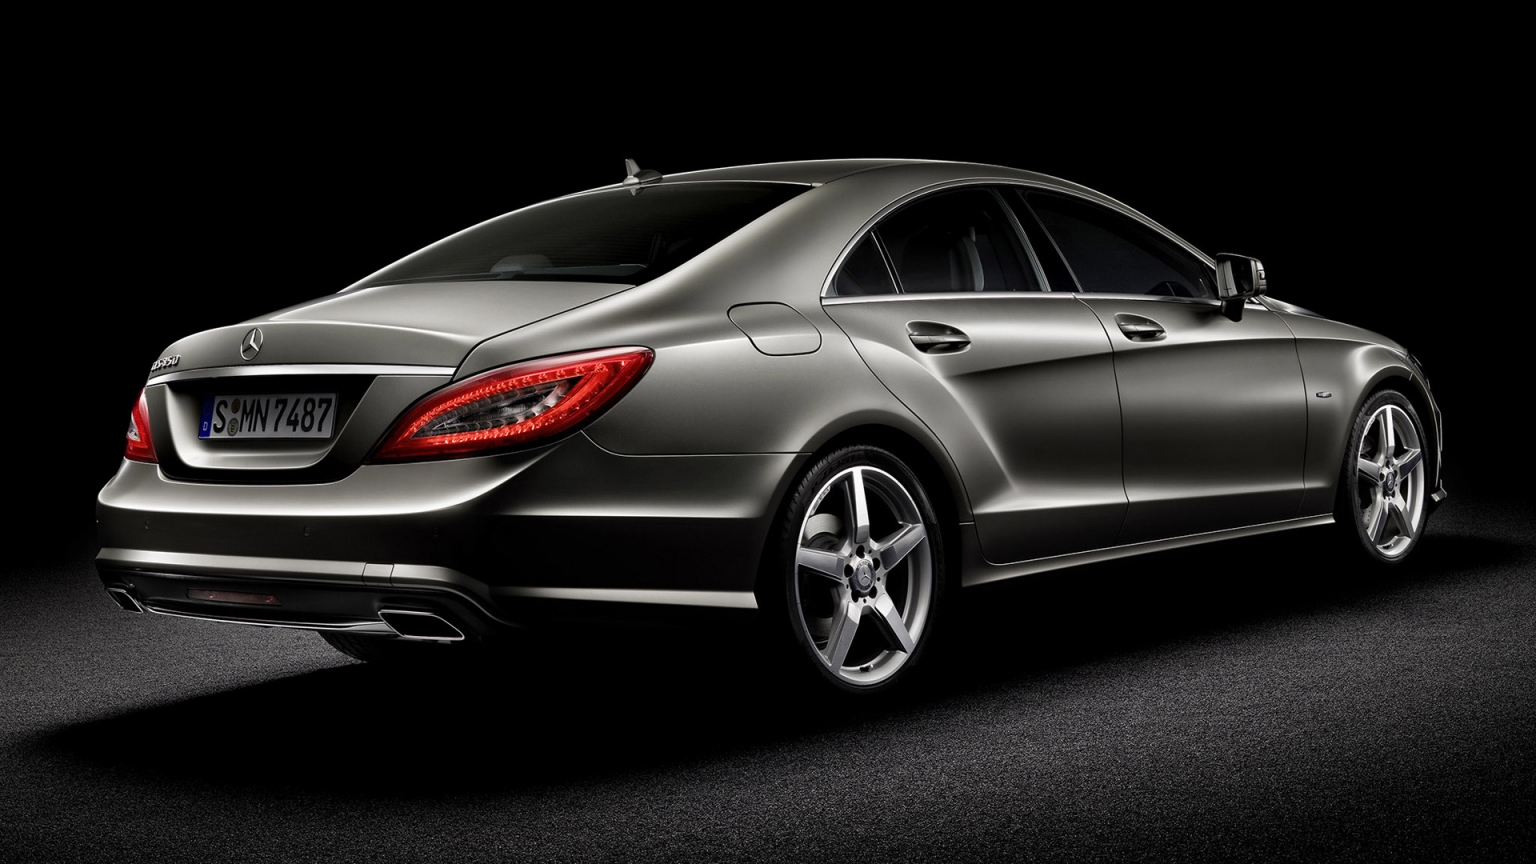 Mercedes CLS 2010 Rear for 1536 x 864 HDTV resolution